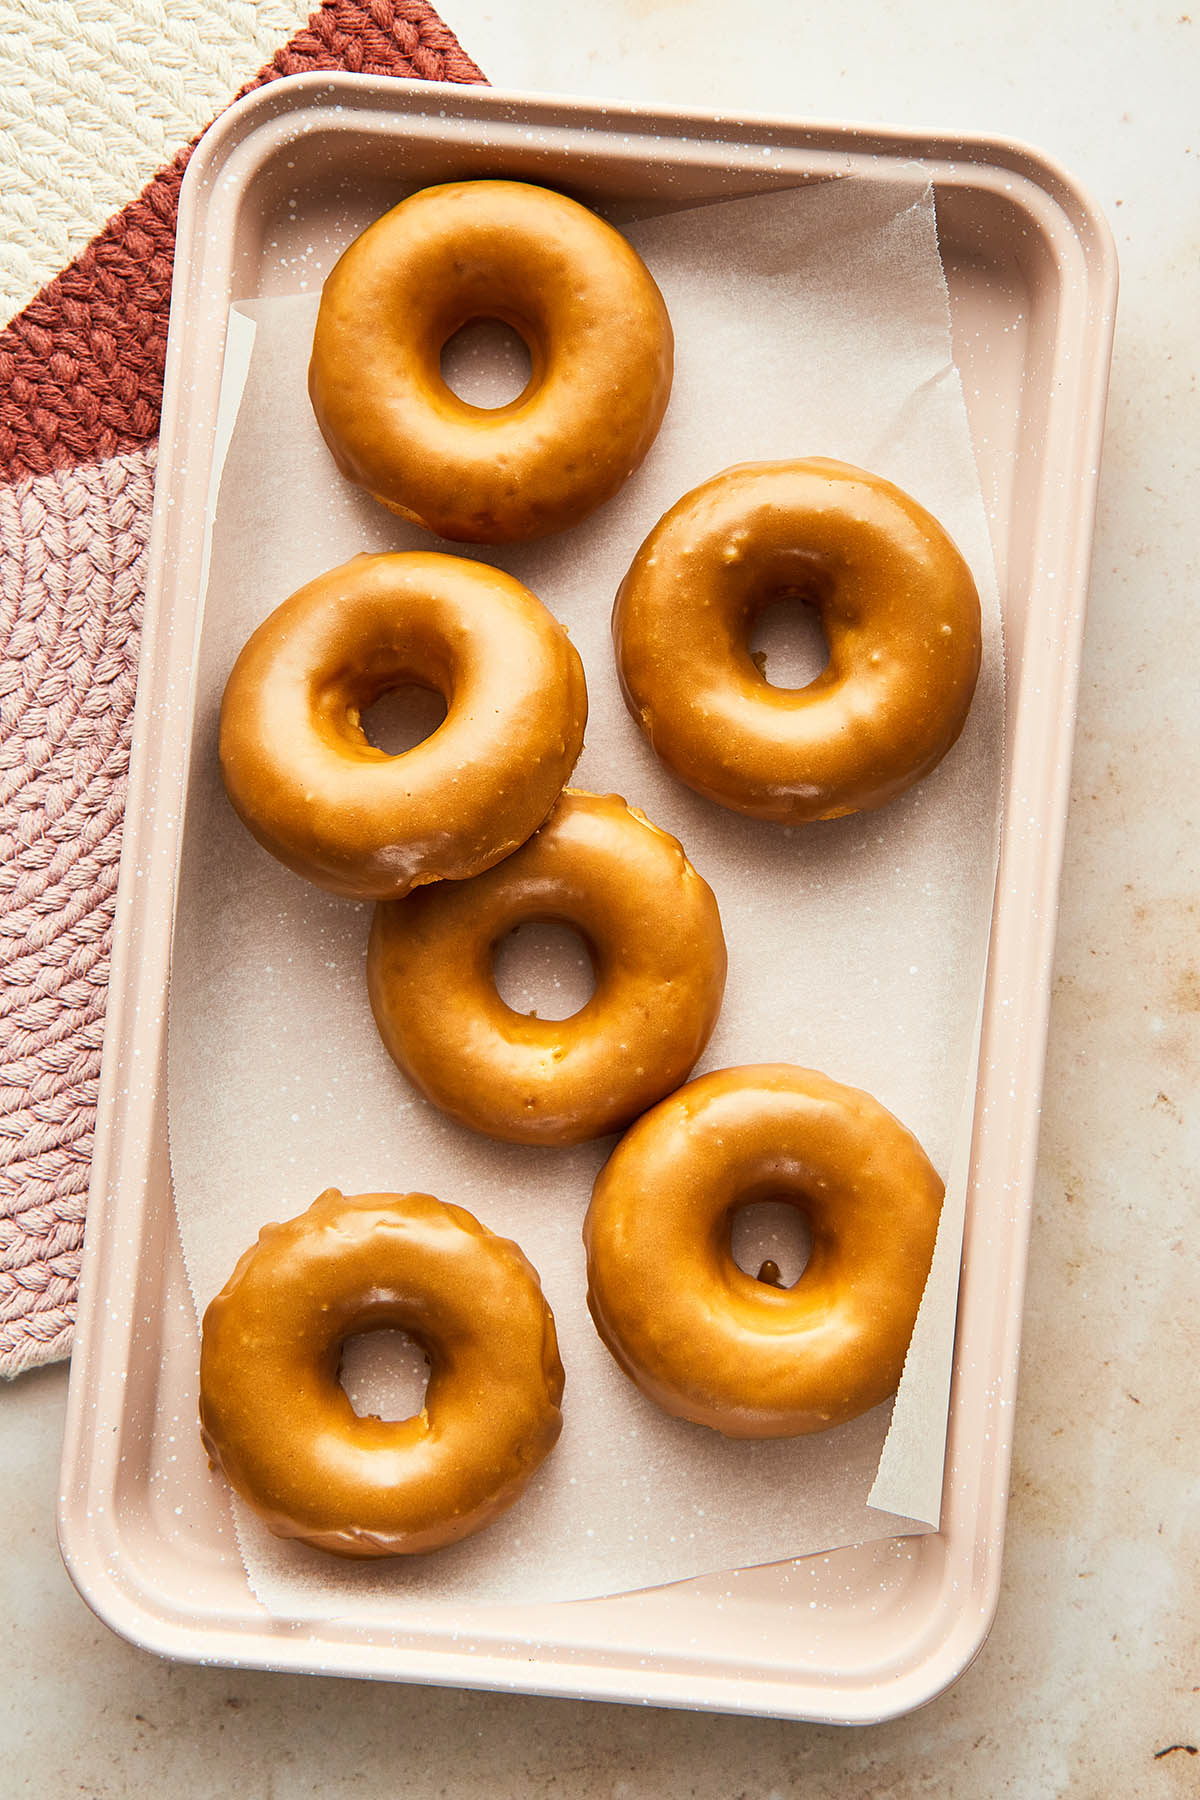 Overhead image of a batch of six oven-baked maple glazed donuts.